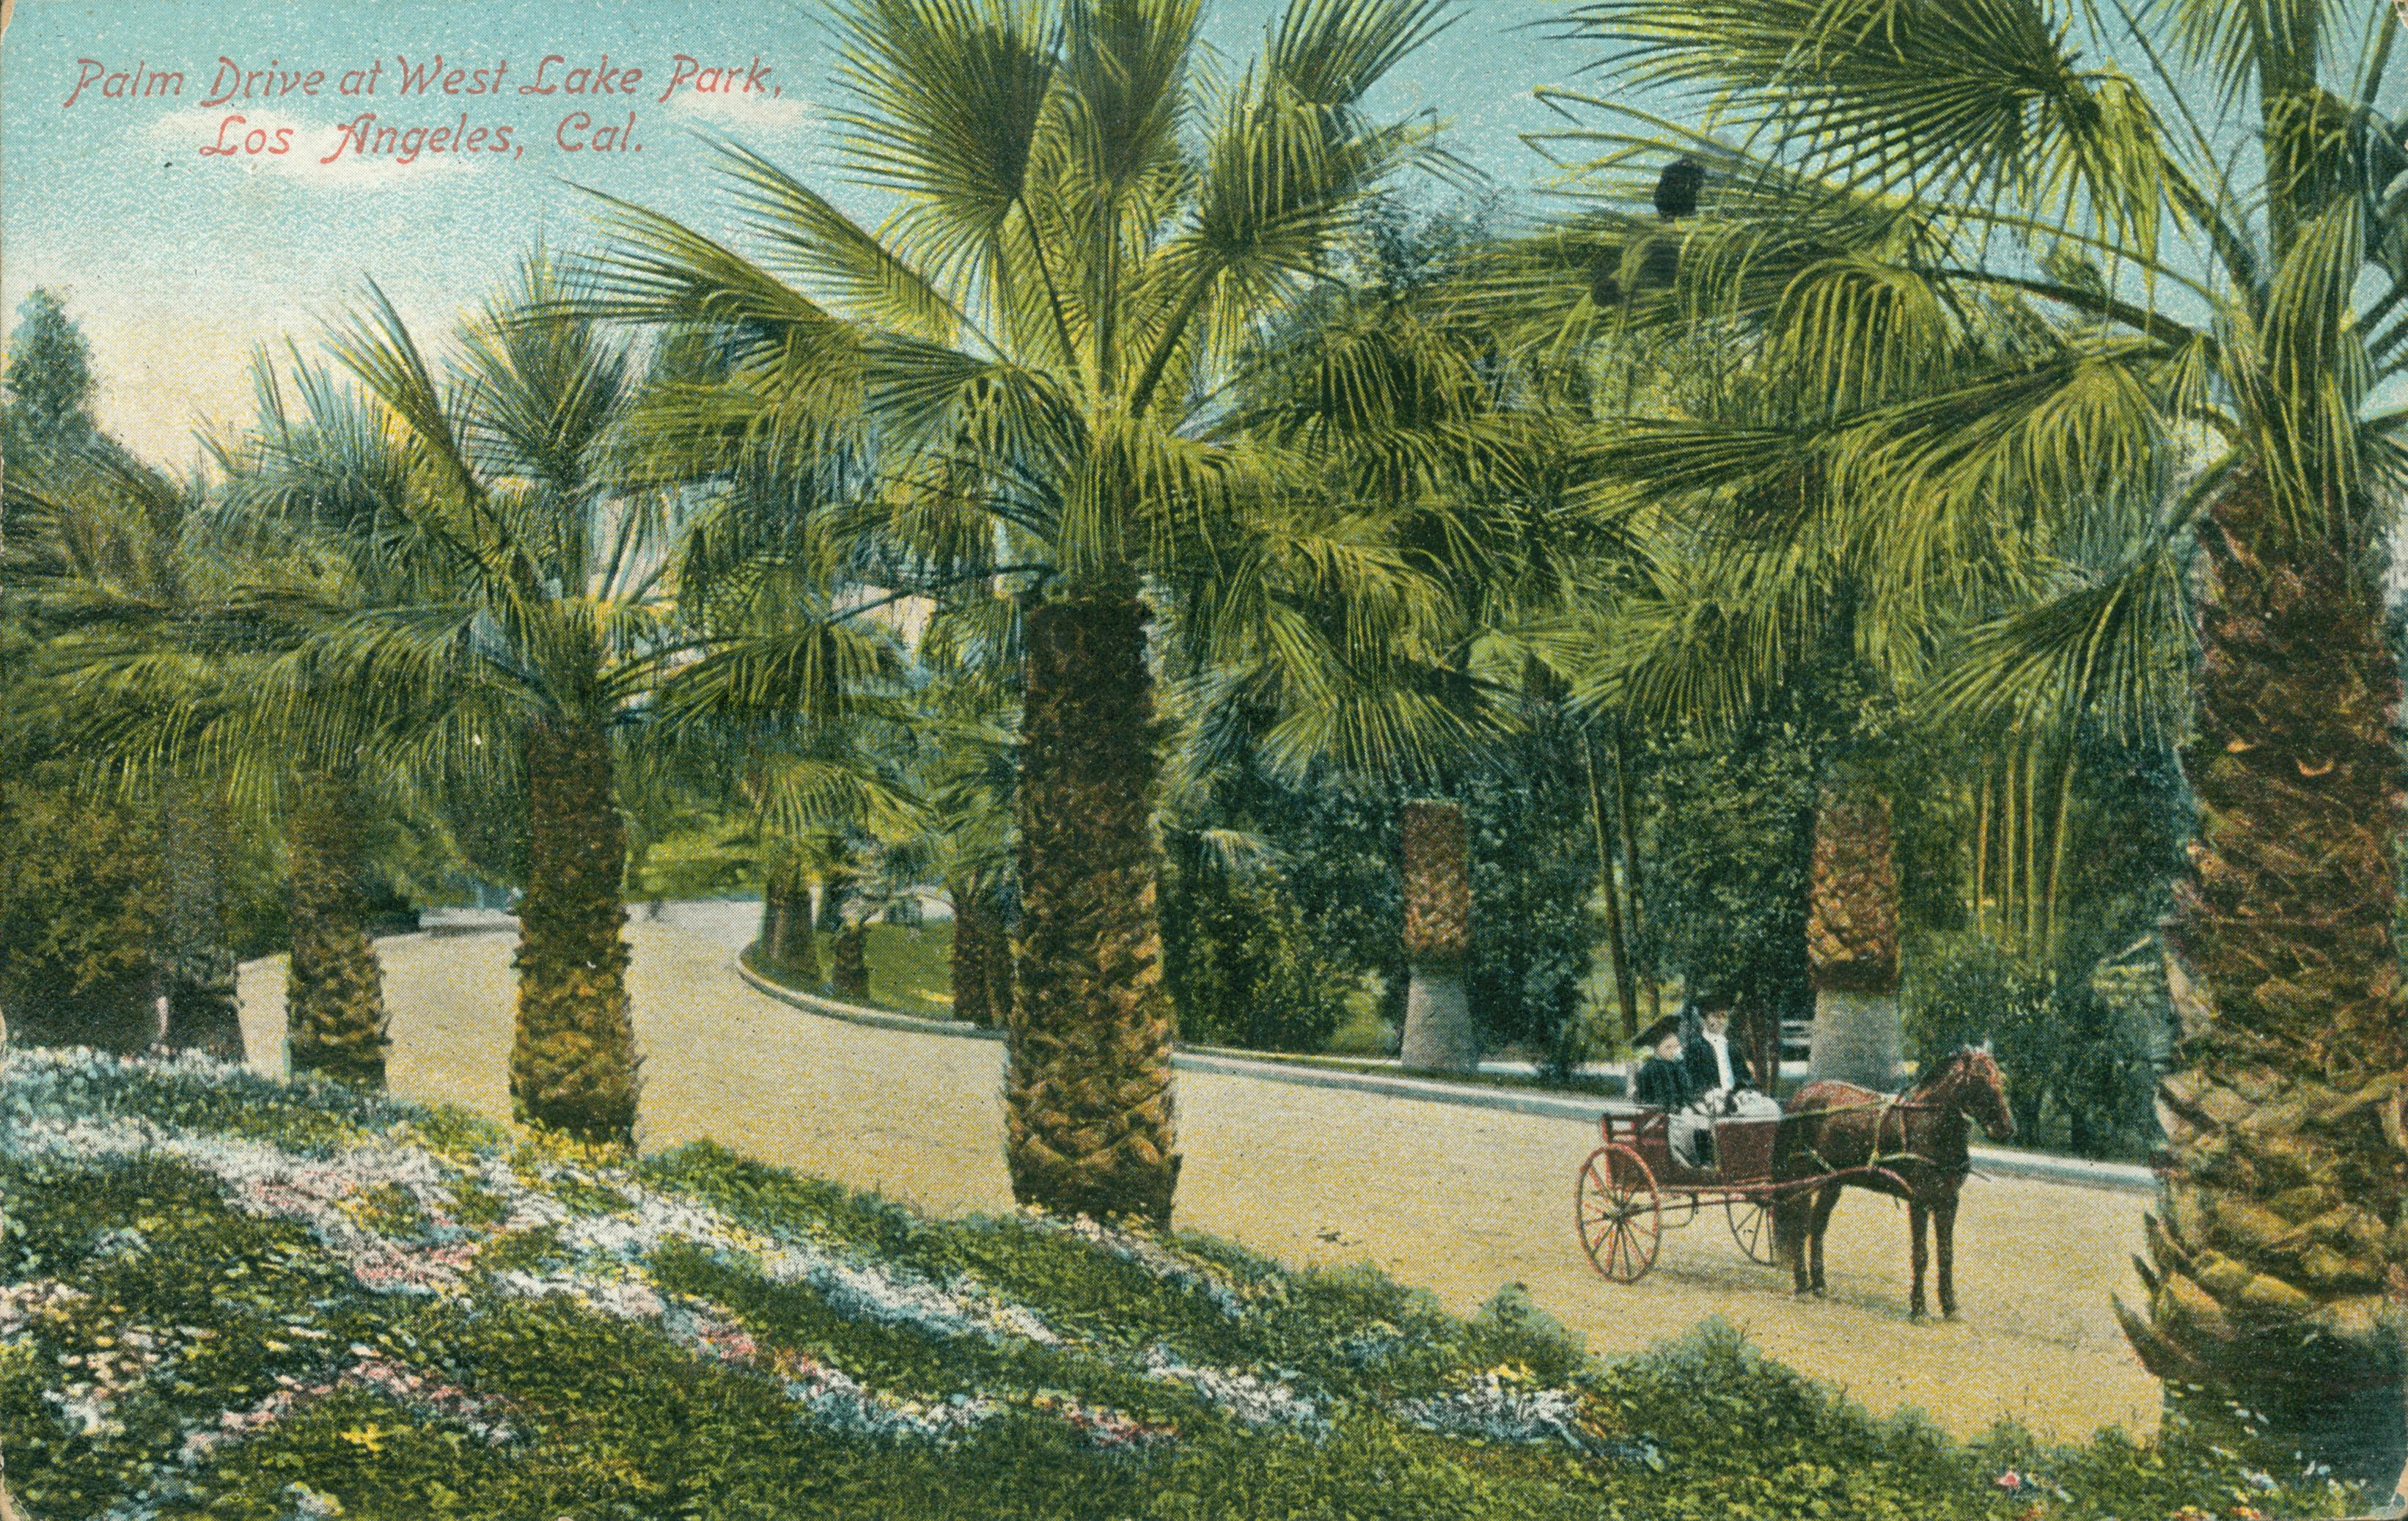 This postcard shows a woman and a child in a horse-drawn cart, driving down a palm-lined street.